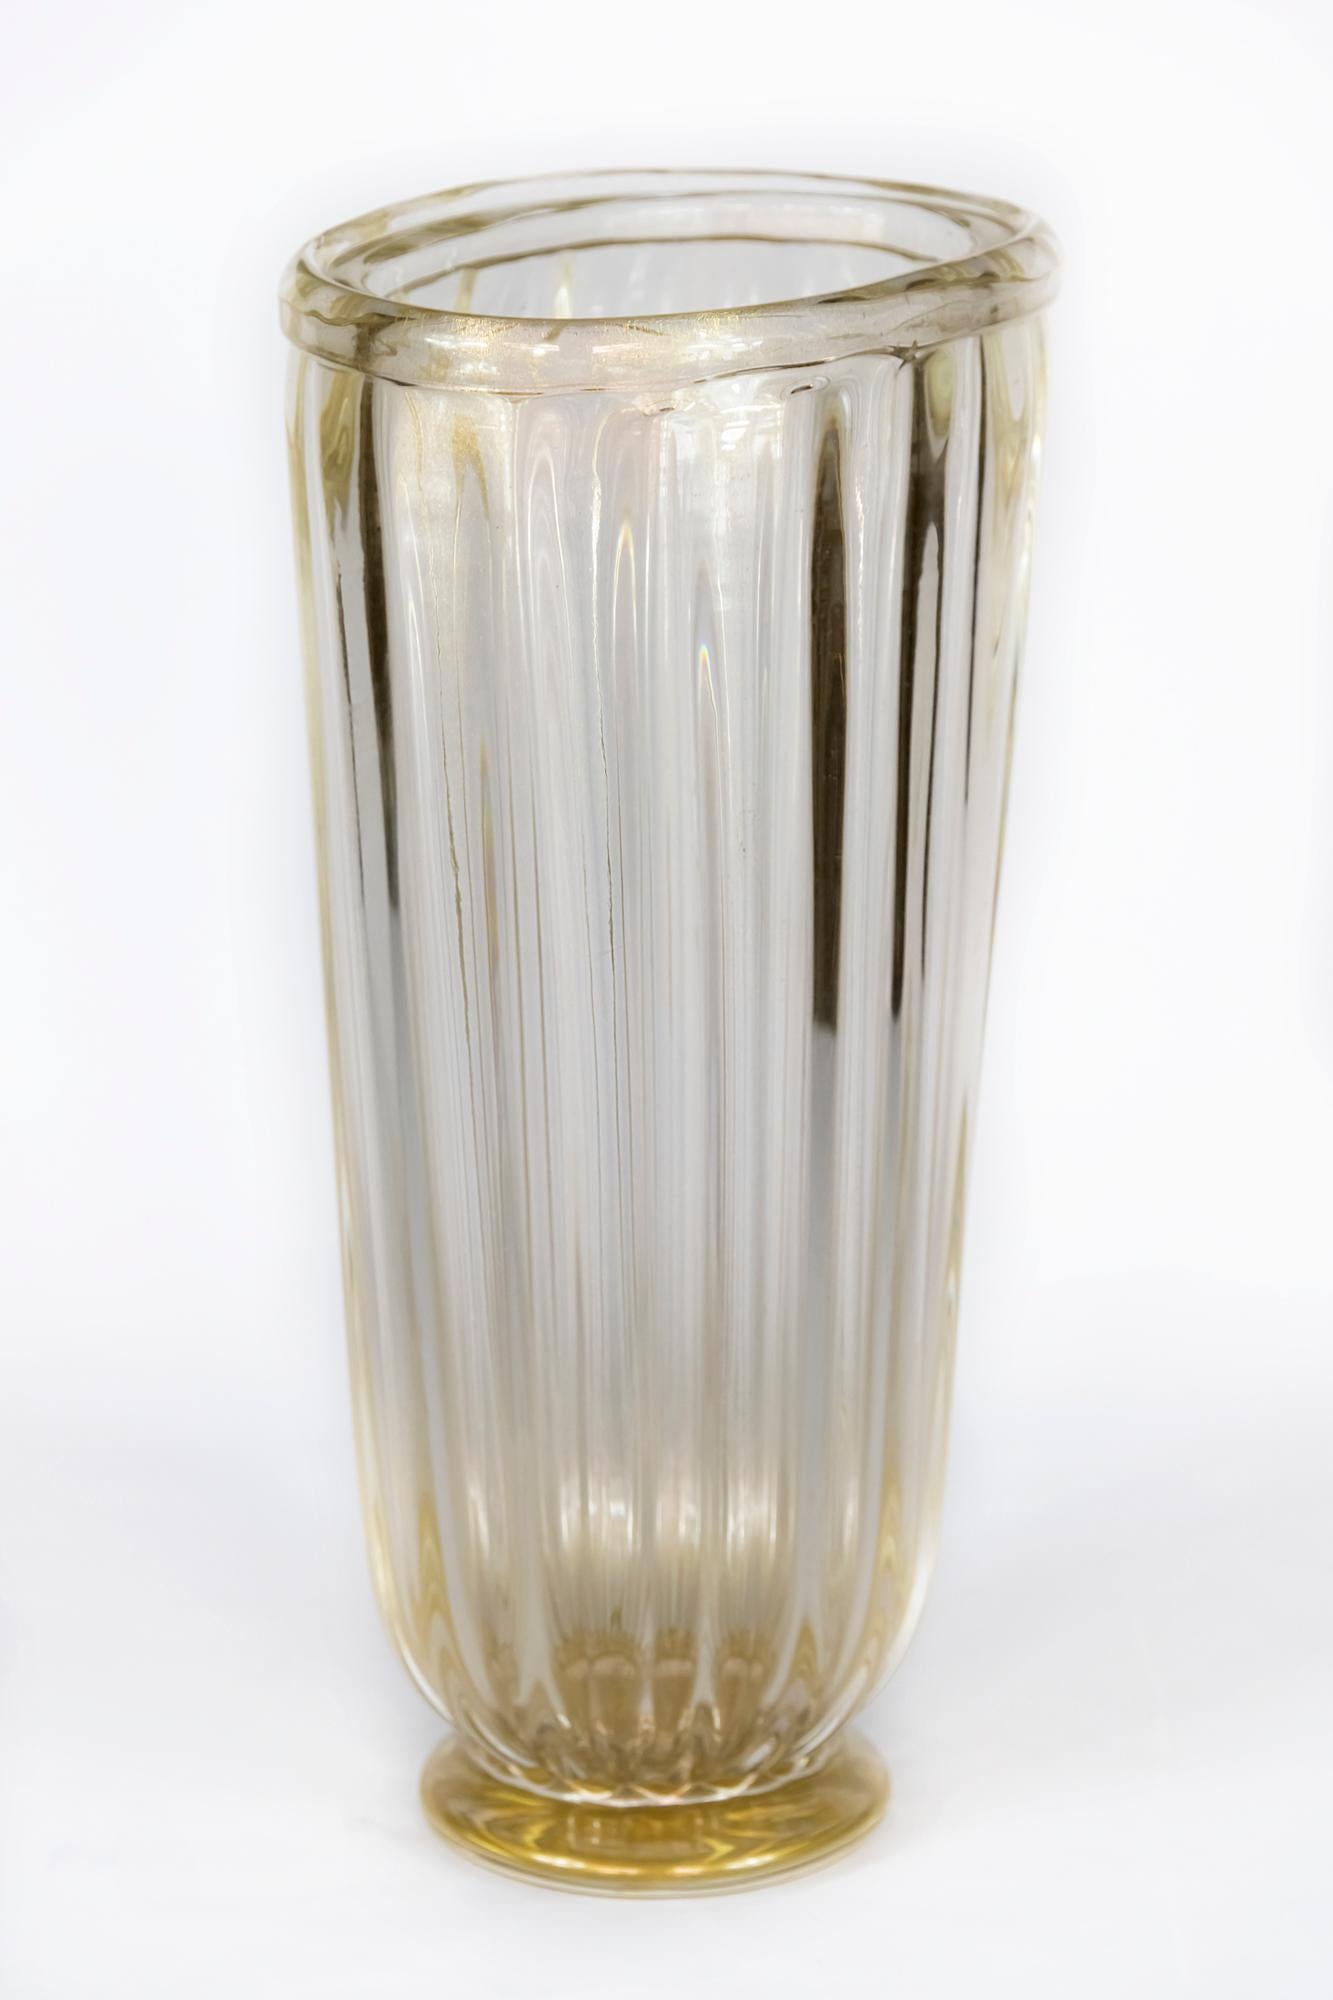 Italian handmade assymetric/oval form vase is made of transparent Murano glass with inlaid gold dust.
 